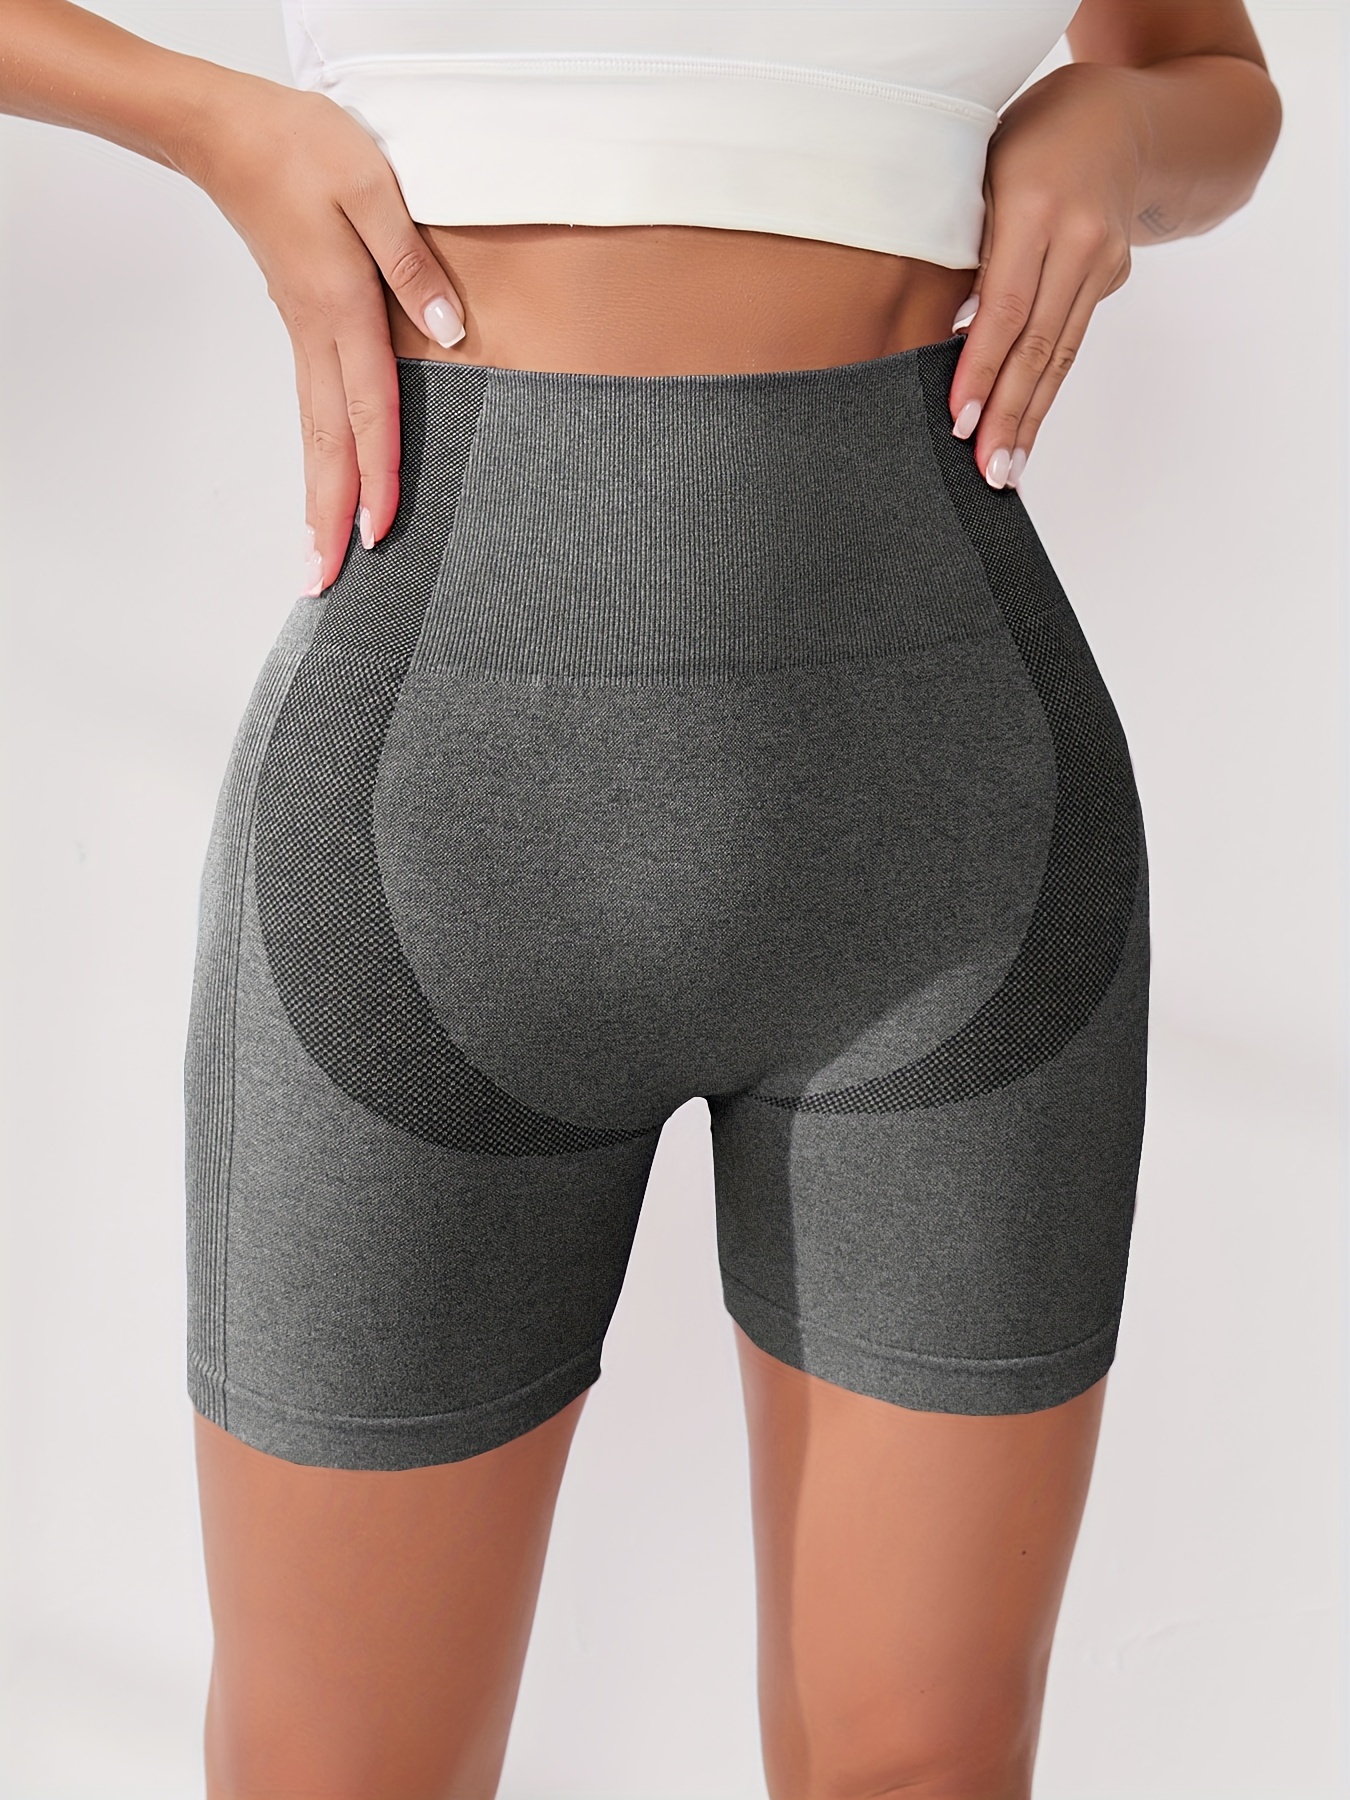 SOWUNO Women Yoga Pants Breathable Tummy Control Lightweight Butt